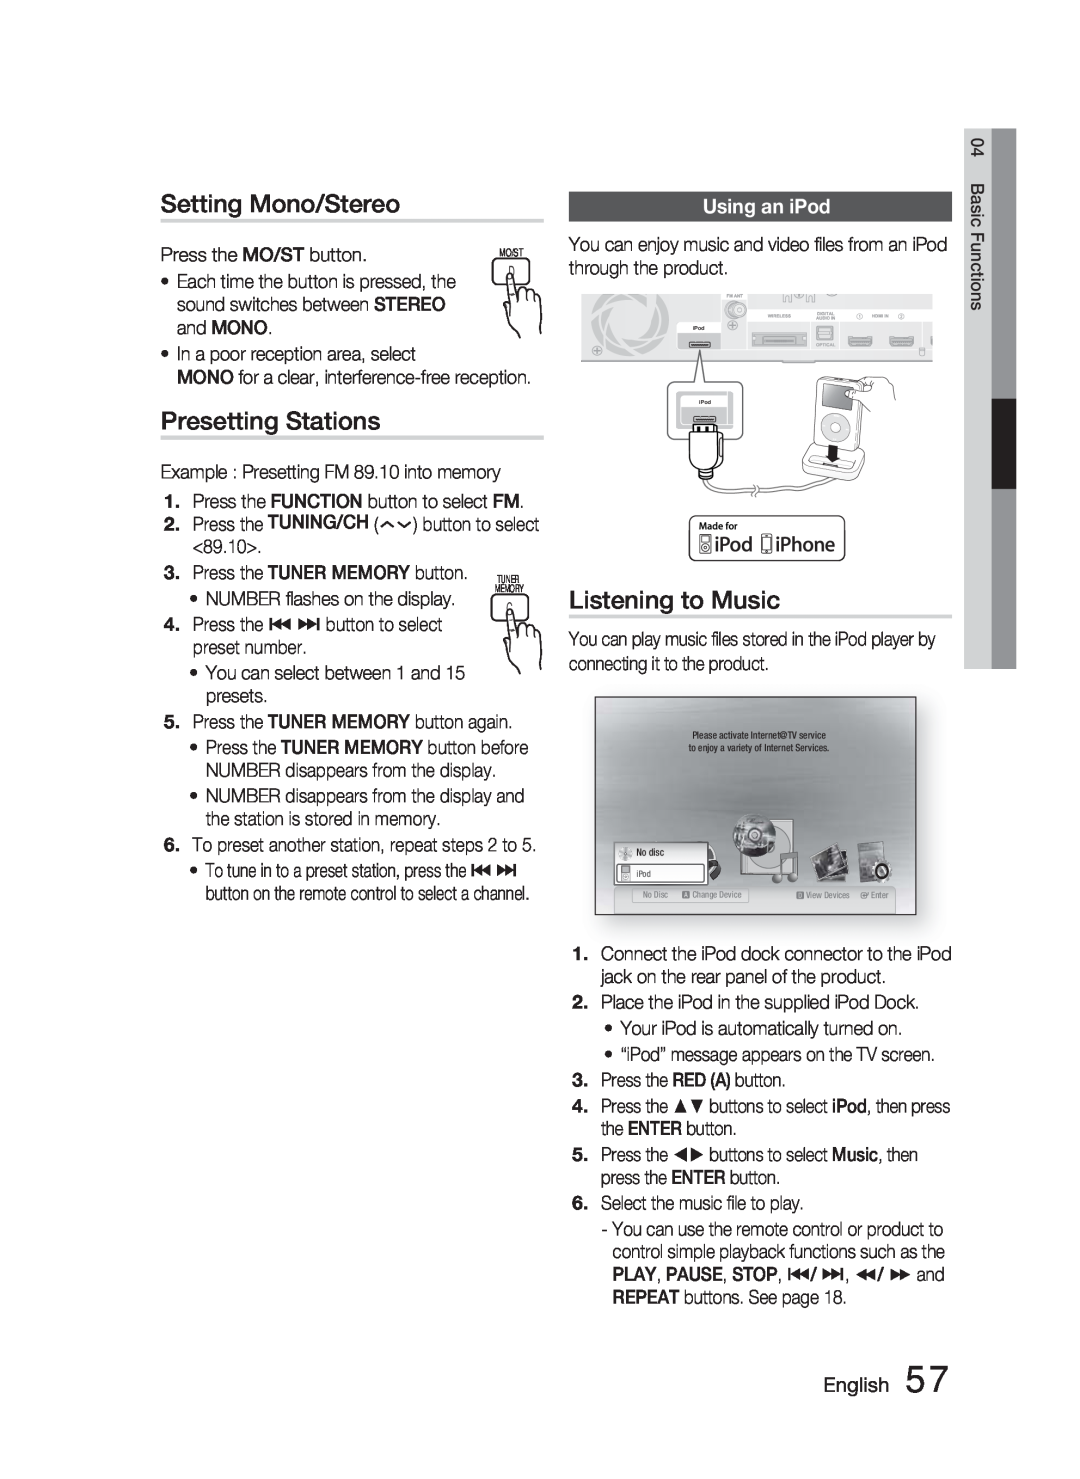 Samsung HT-C6900W user manual Setting Mono/Stereo, Presetting Stations, Listening to Music, Using an iPod, English 